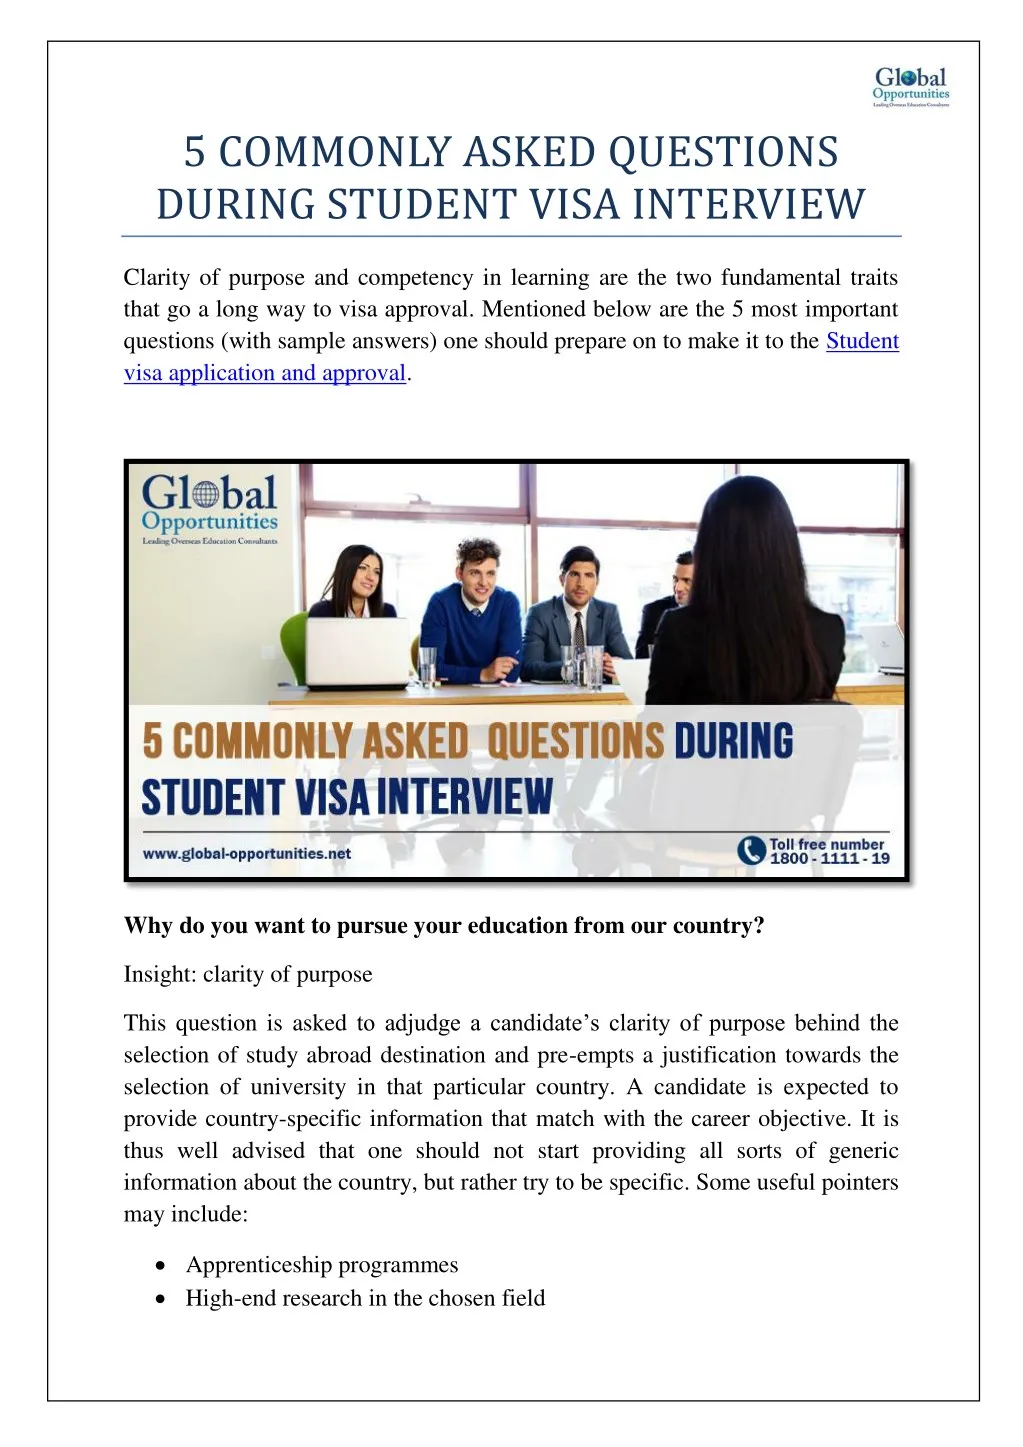 5 commonly asked questions during student visa